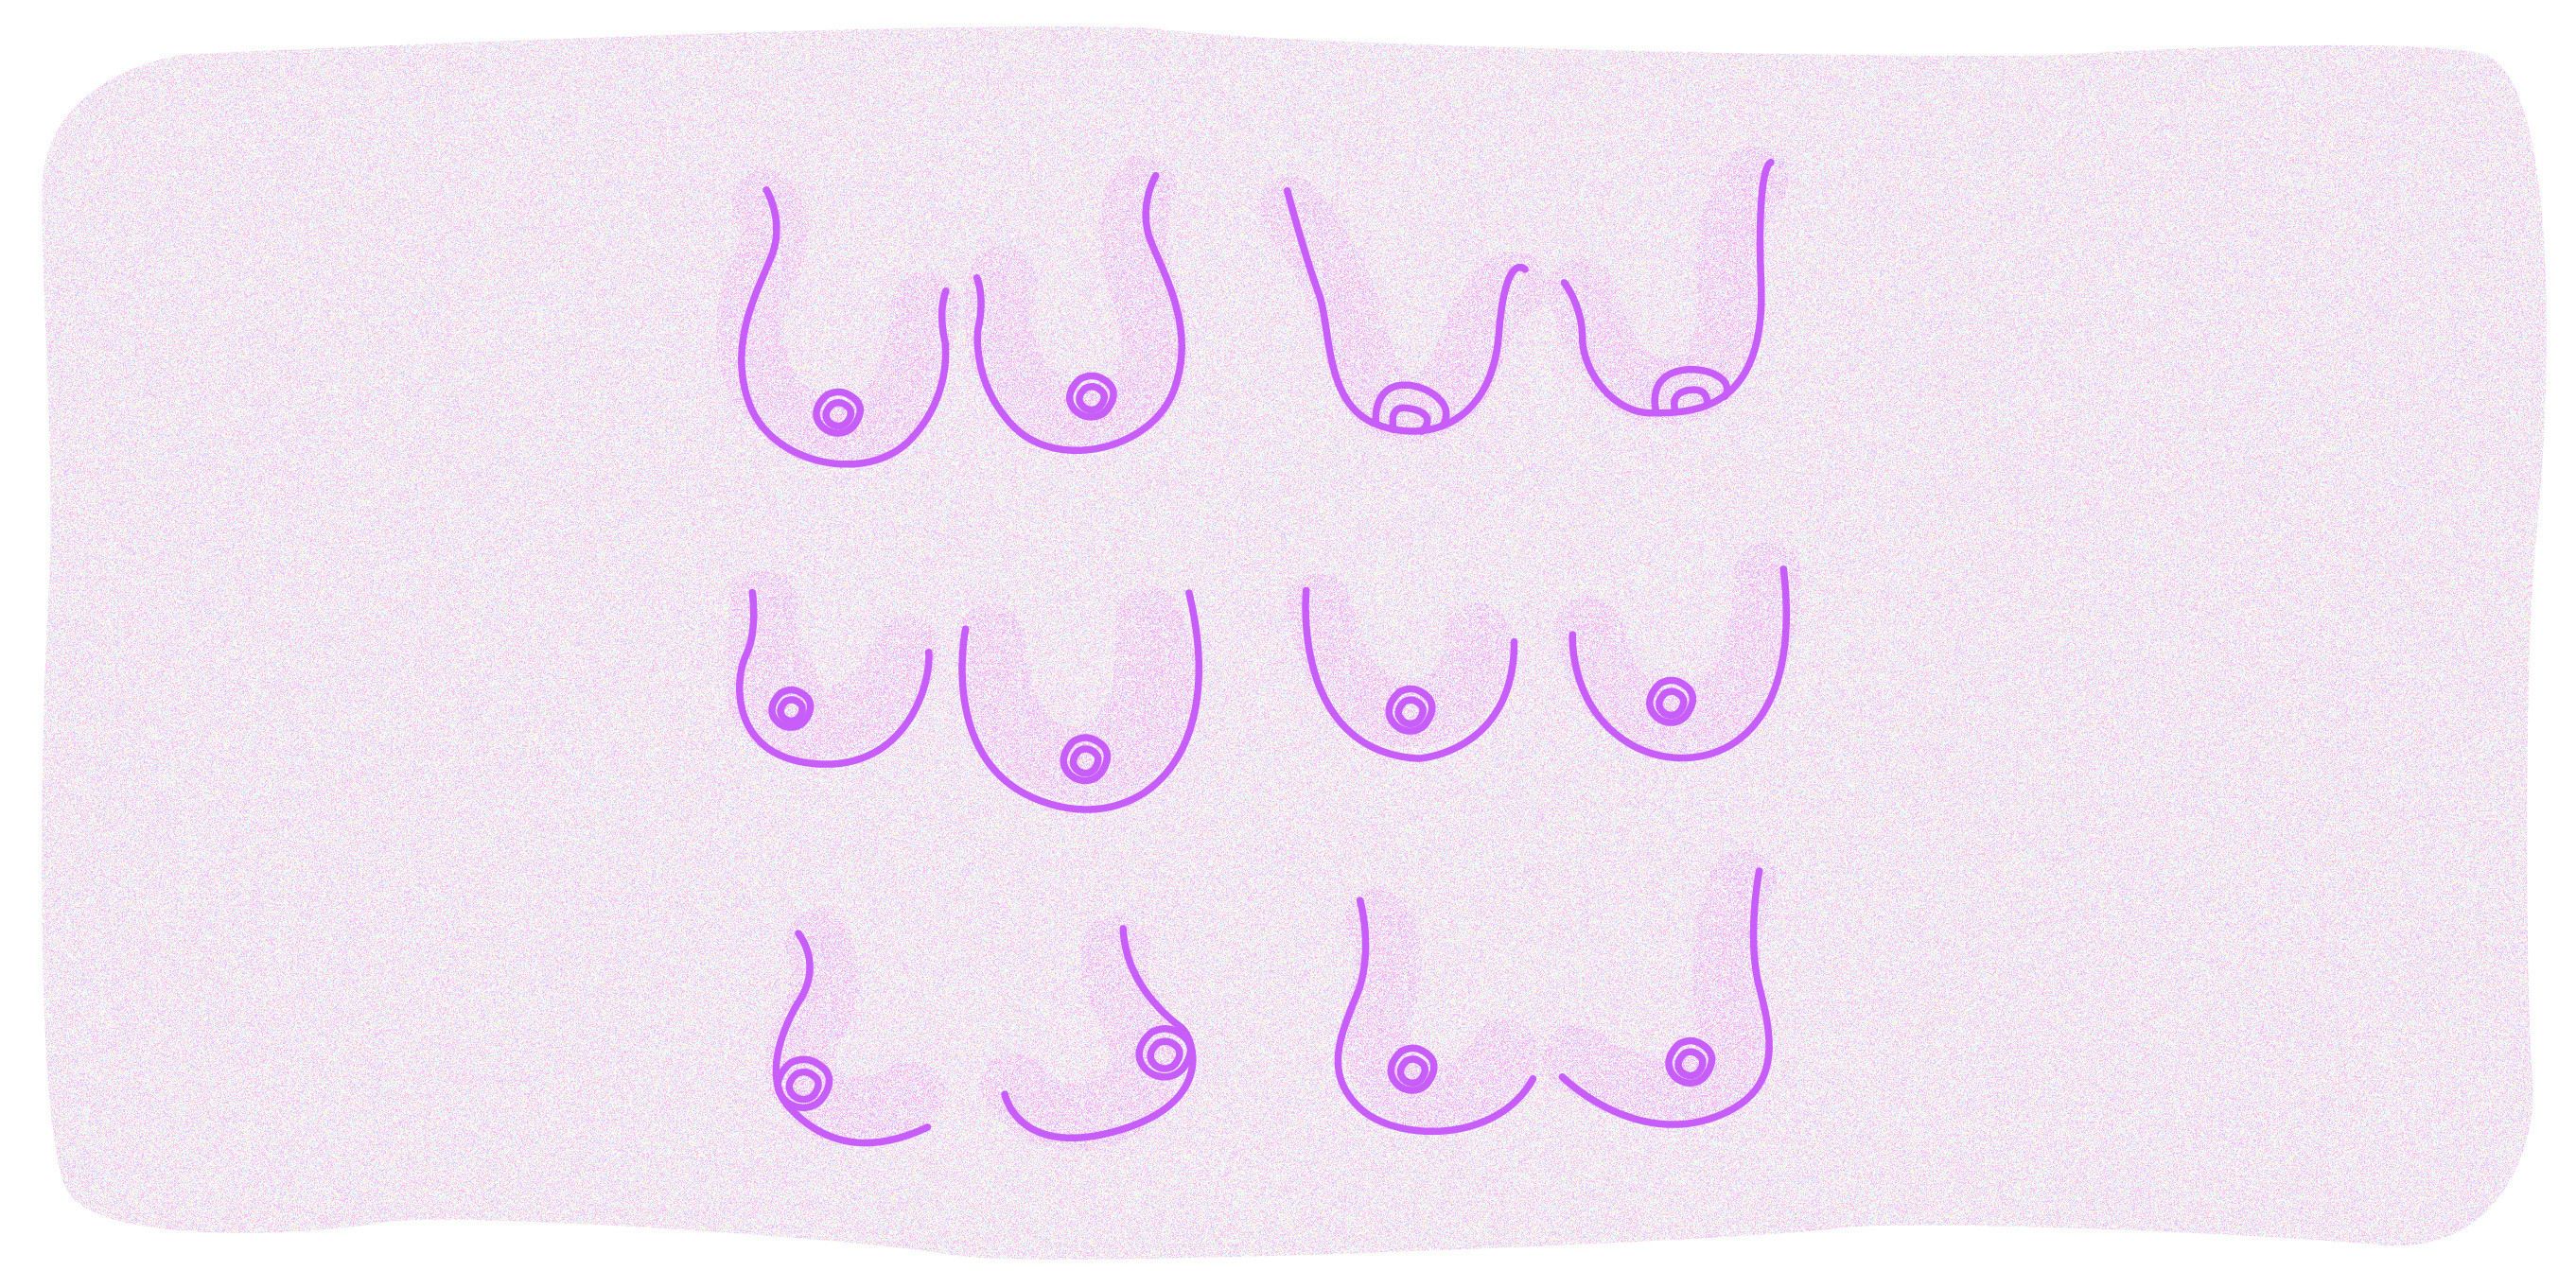 8 Types of Boobs in the World